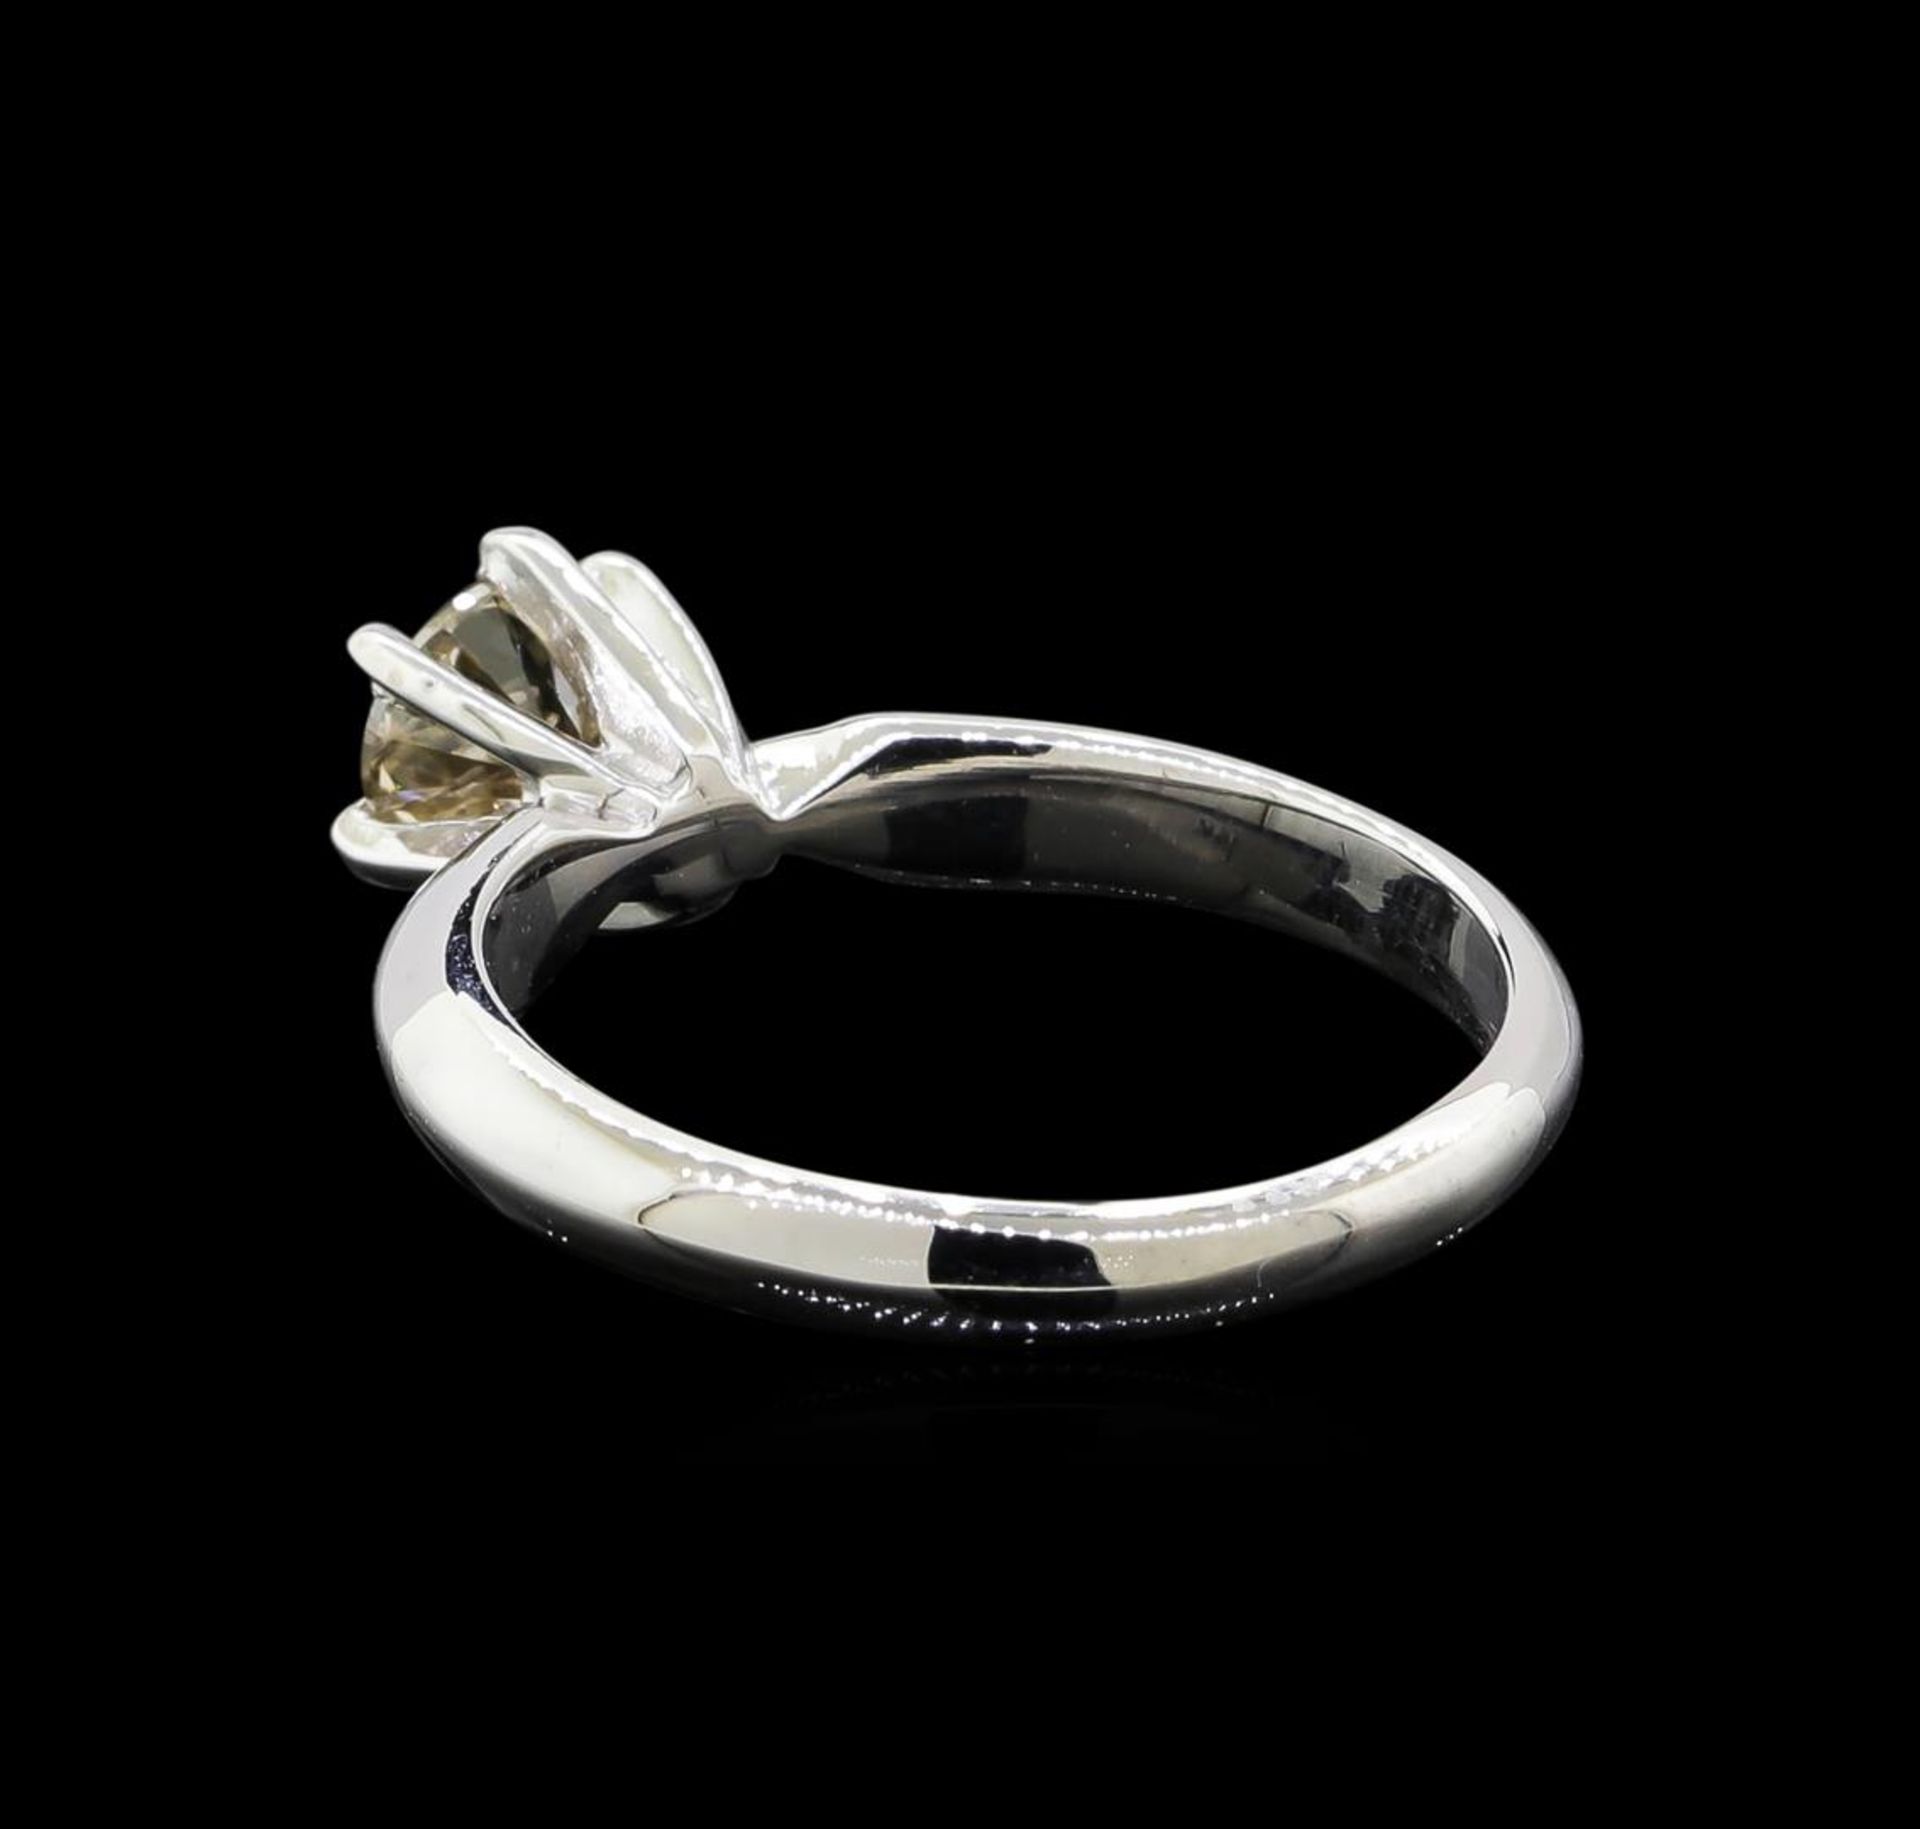 14KT White Gold 0.70 ctw Round Cut Fancy Brown Diamond Solitaire Ring - Image 3 of 5